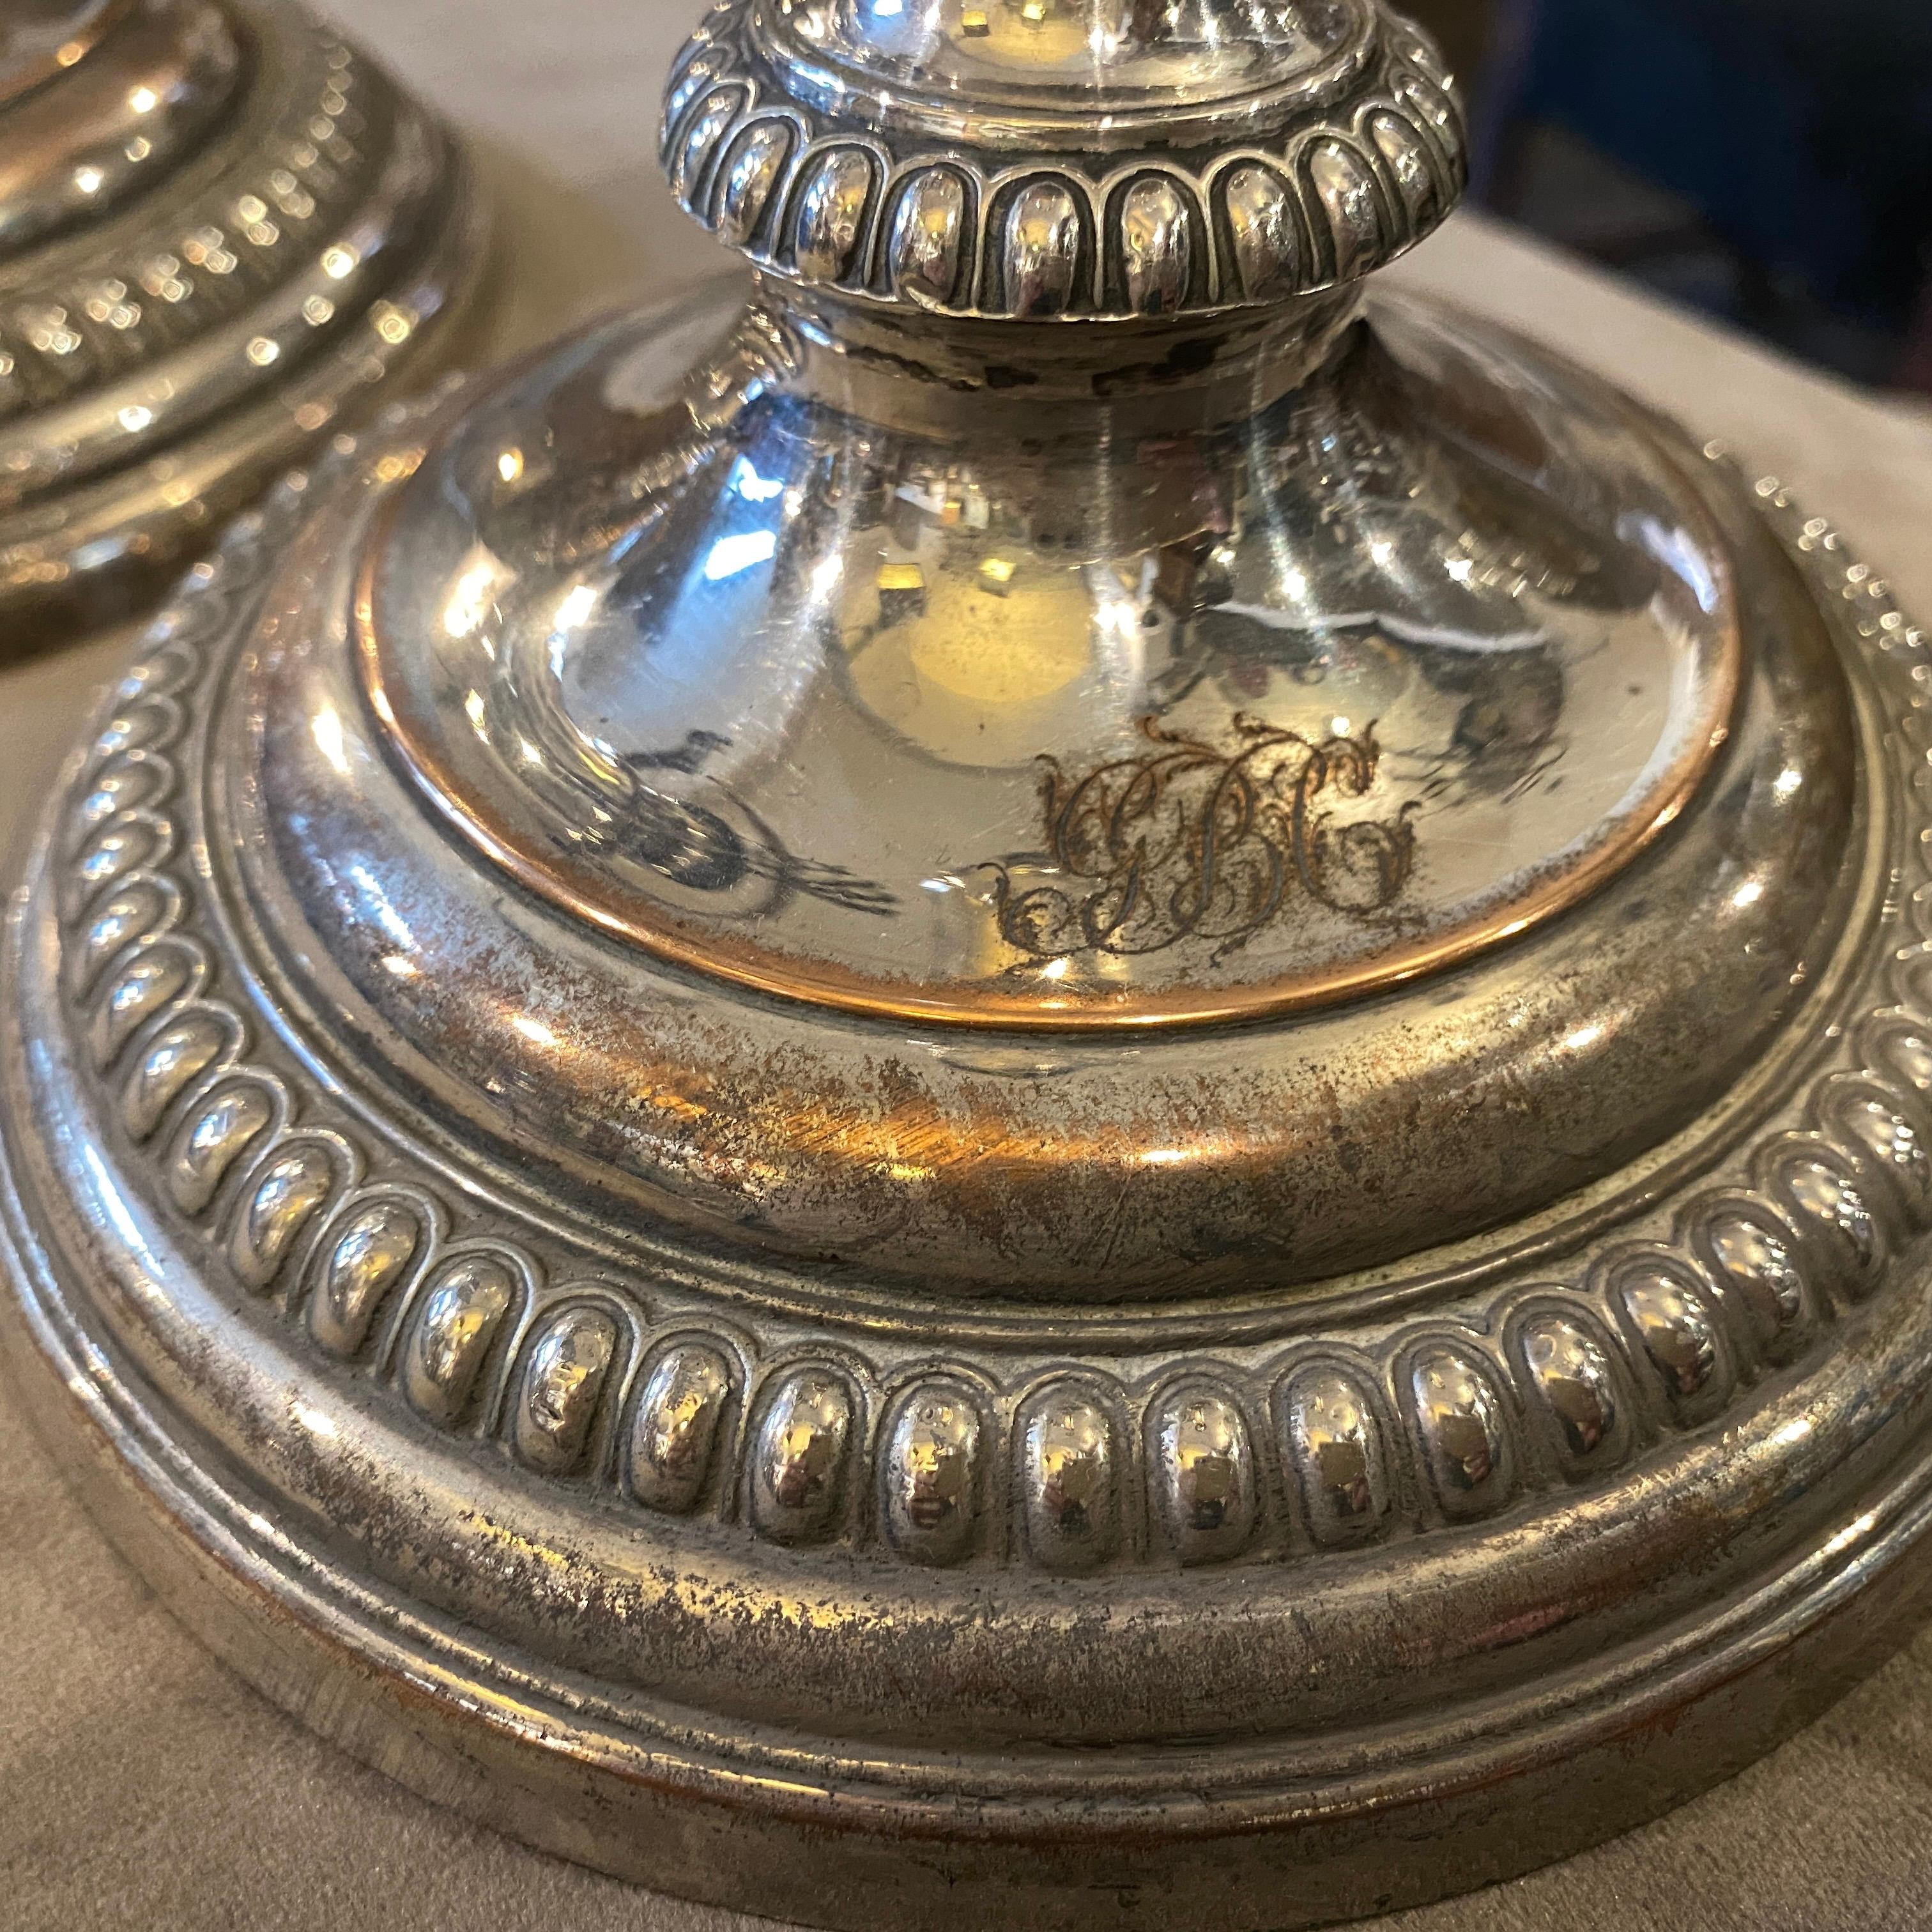 A superb pair of original Sheffield plate candlesticks made in England in 1835, original conditions, they have a monogram on the front of the base.